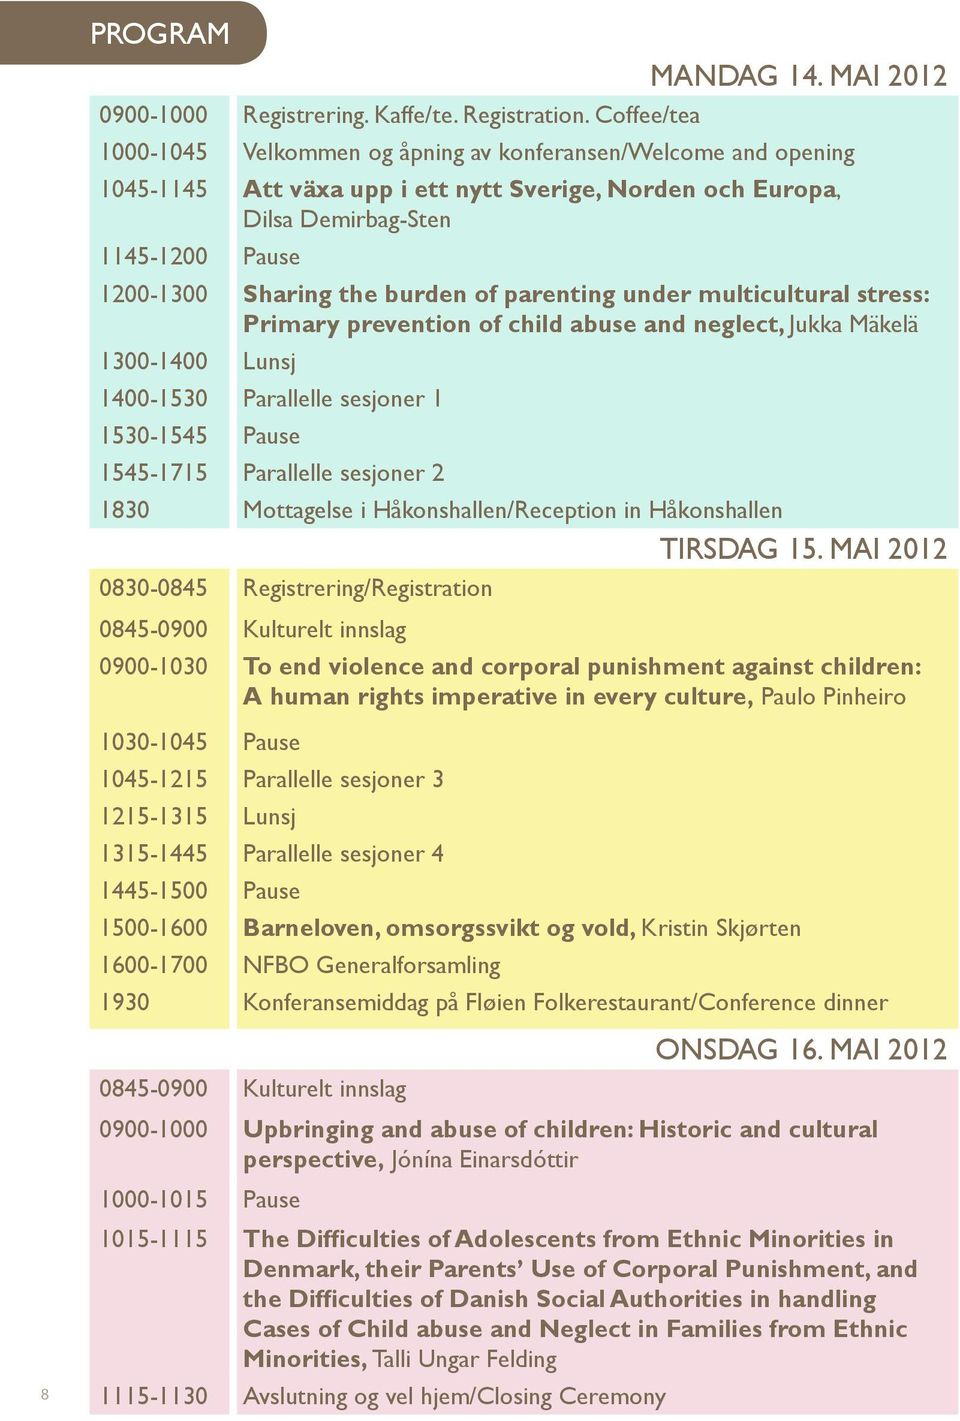 burden of parenting under multicultural stress: Primary prevention of child abuse and neglect, Jukka Mäkelä 1300-1400 Lunsj 1400-1530 Parallelle sesjoner 1 1530-1545 Pause 1545-1715 Parallelle